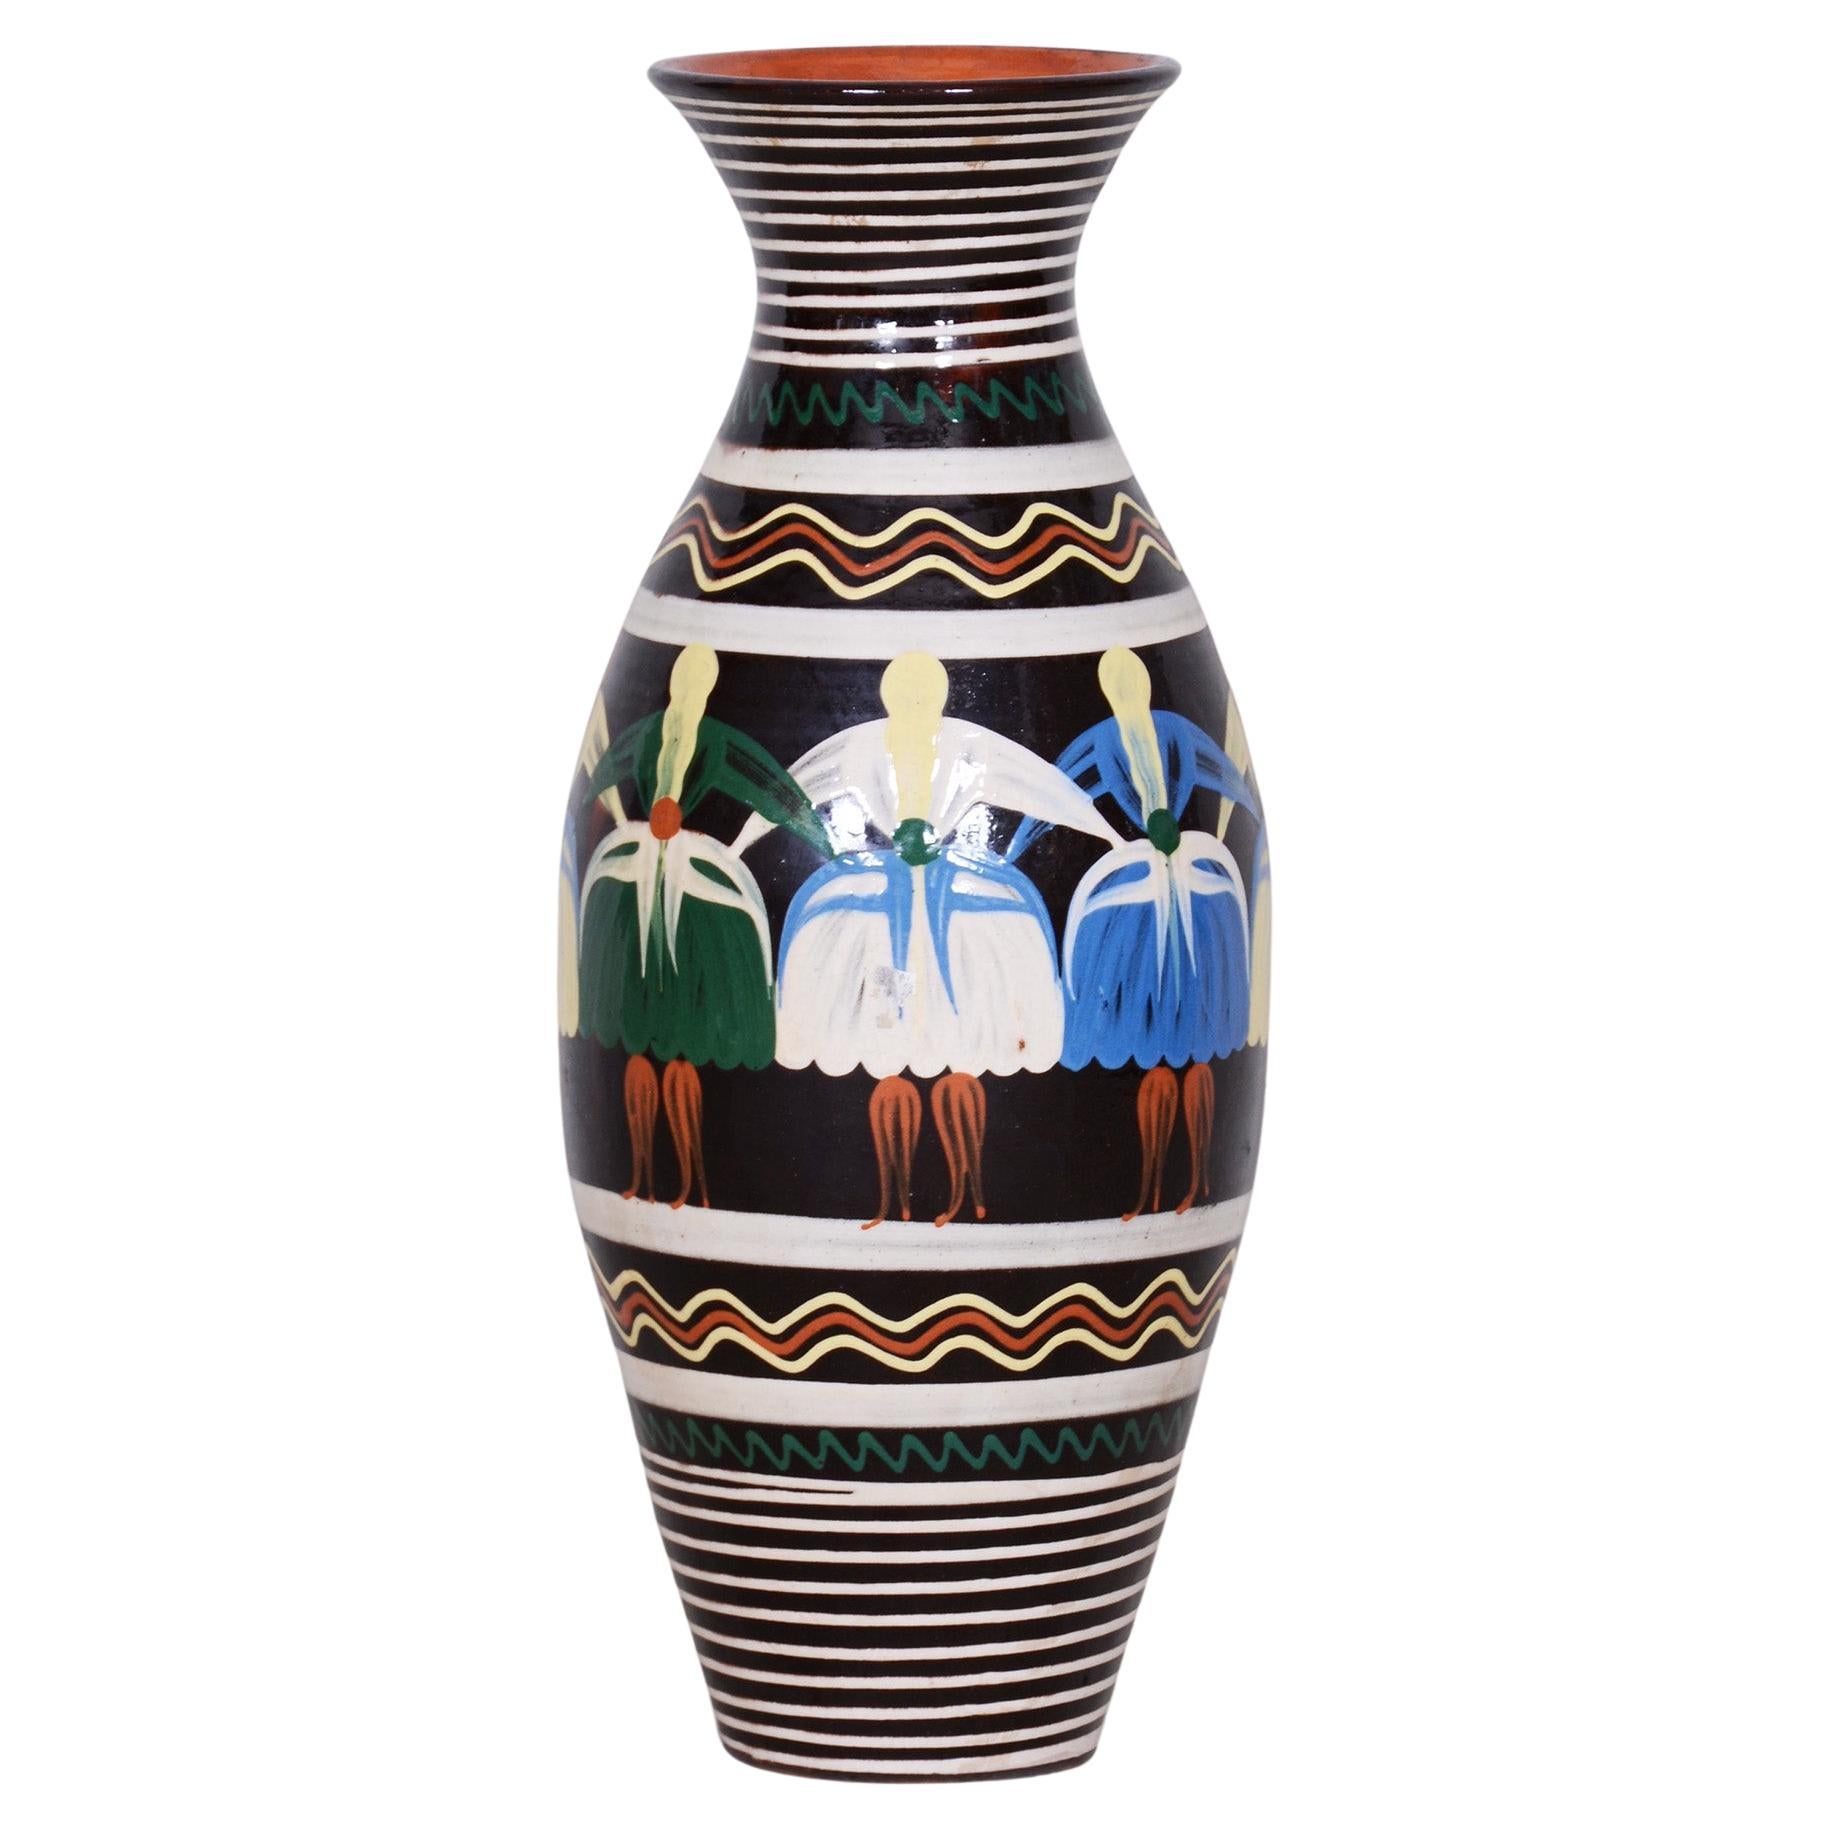 Art Deco Vase Made in 1940s Czechia, Hand Painted Slovak Motifs For Sale